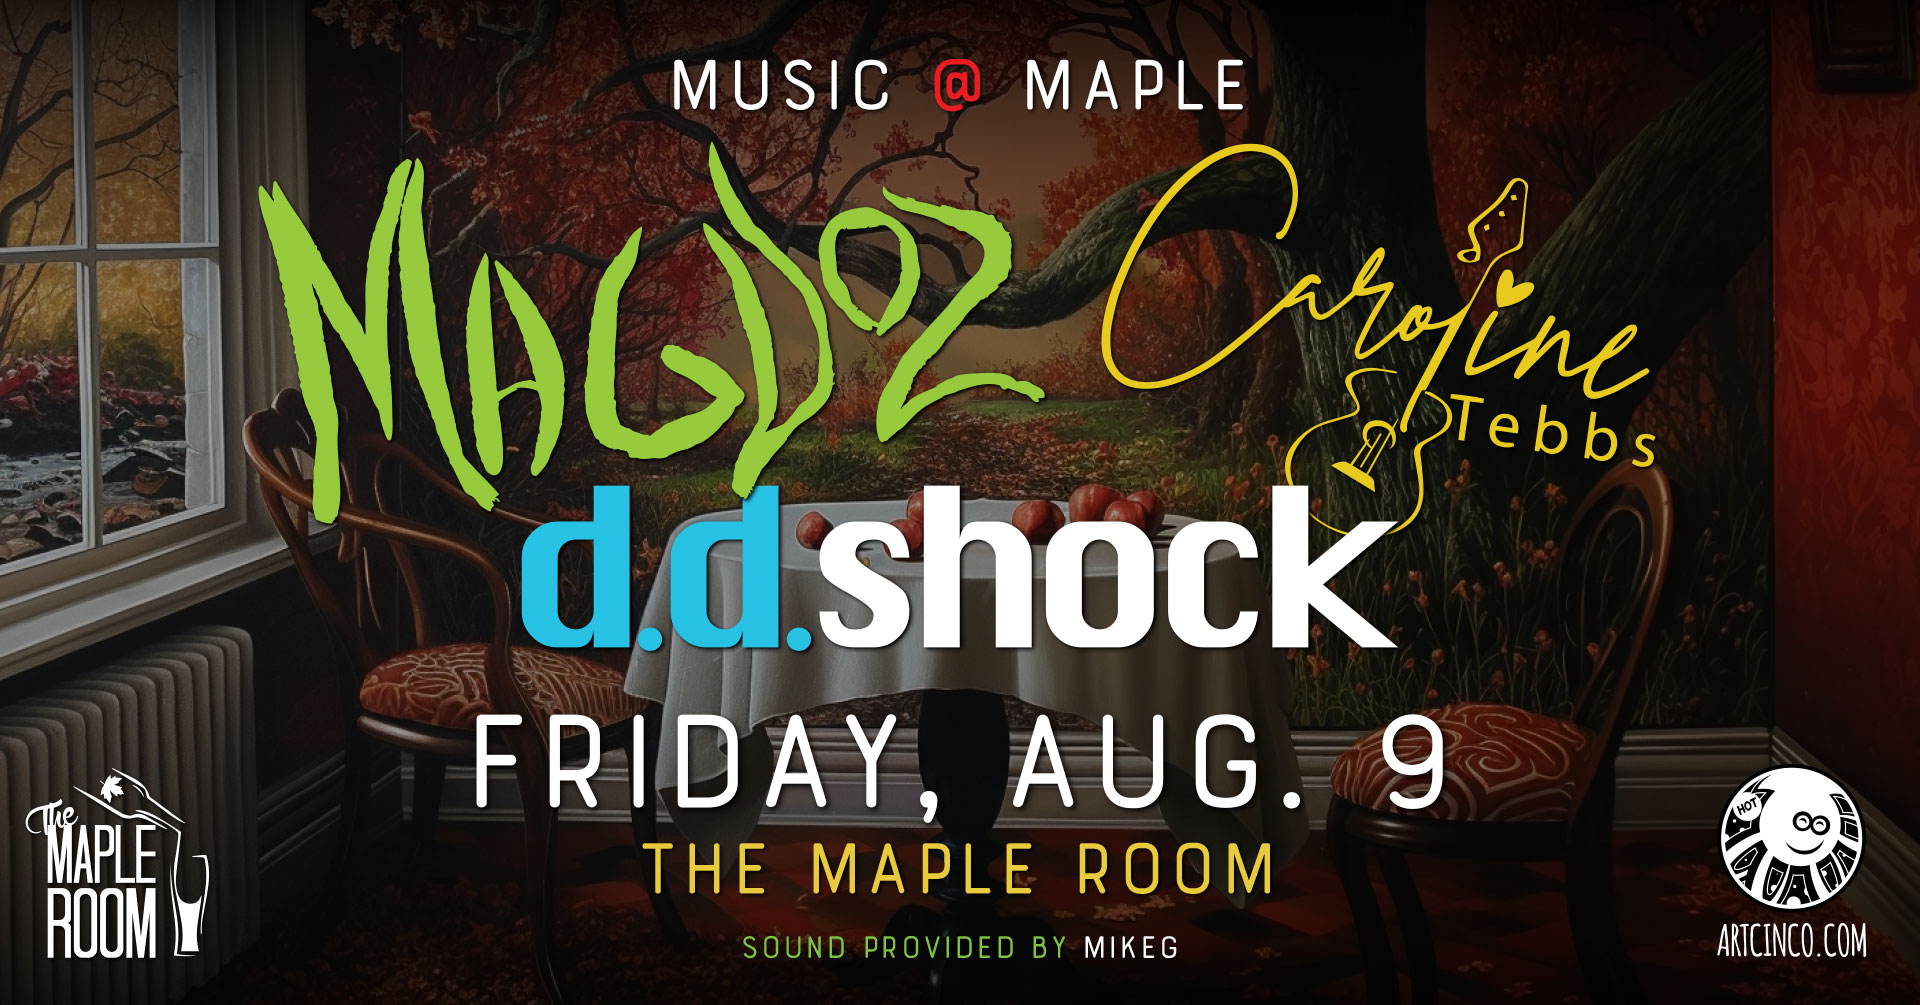 ddshock at the maple room